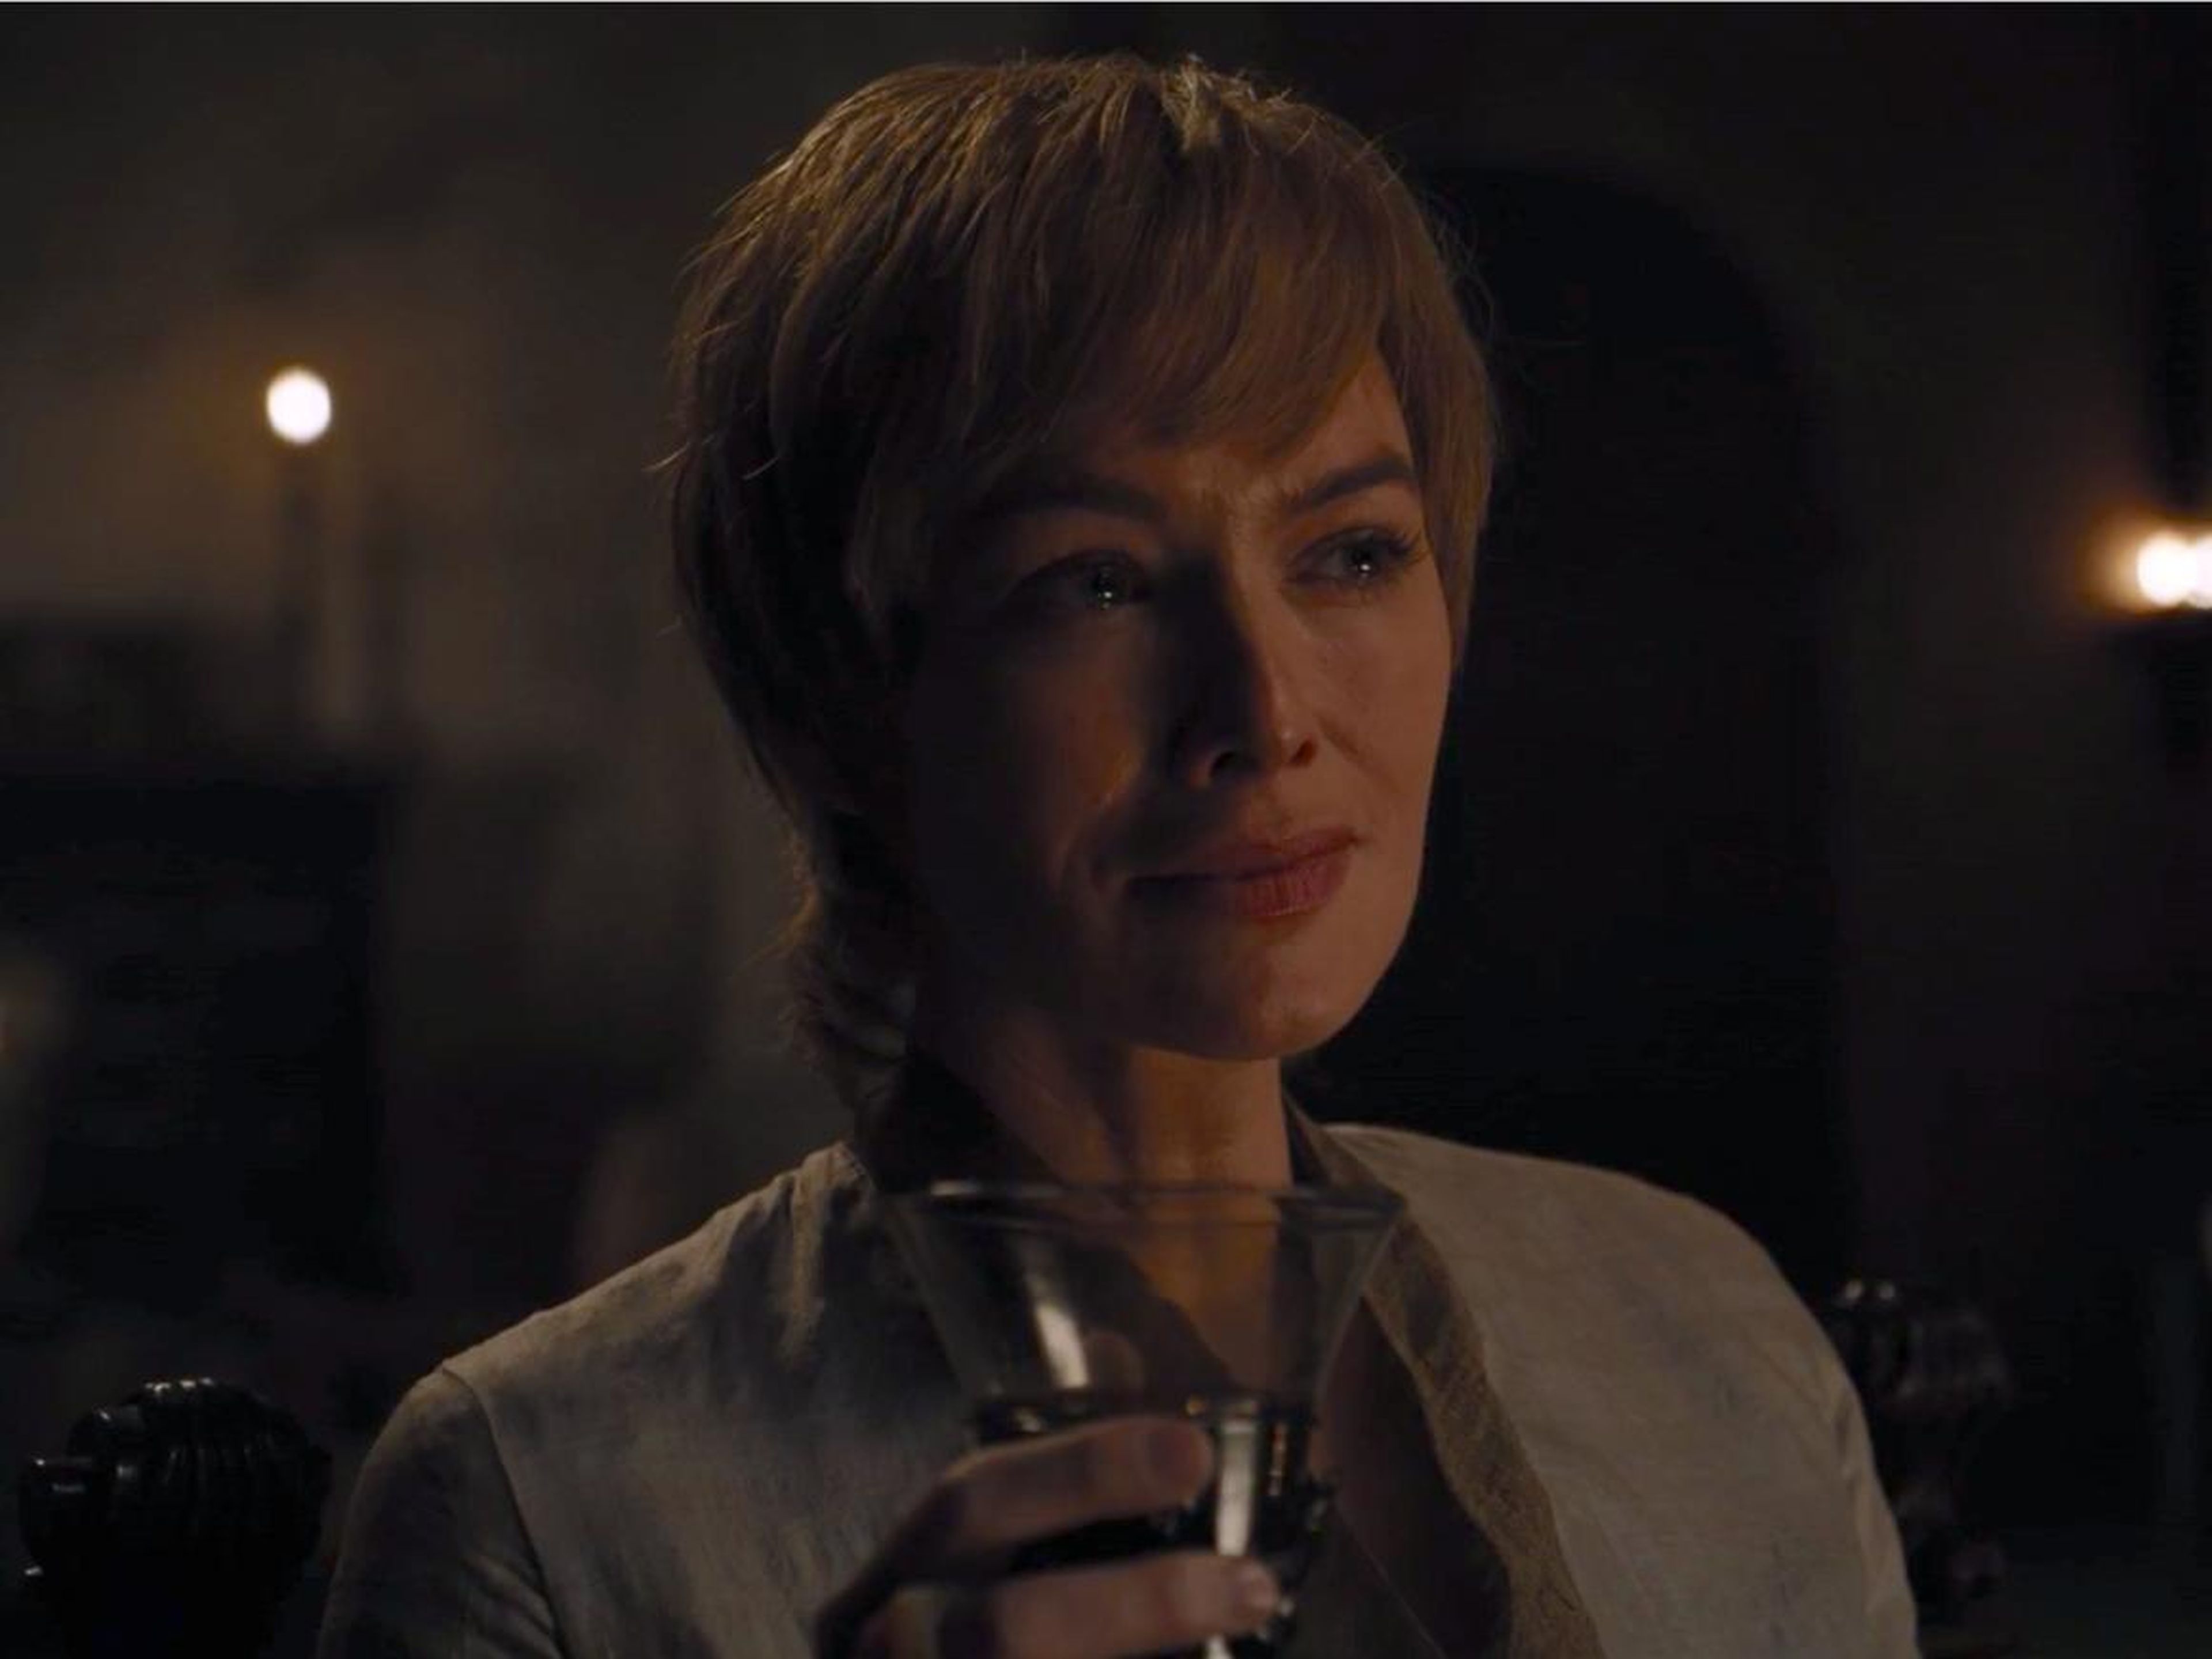 Lena Headey plays Cersei Lannister on "Game of Thrones."